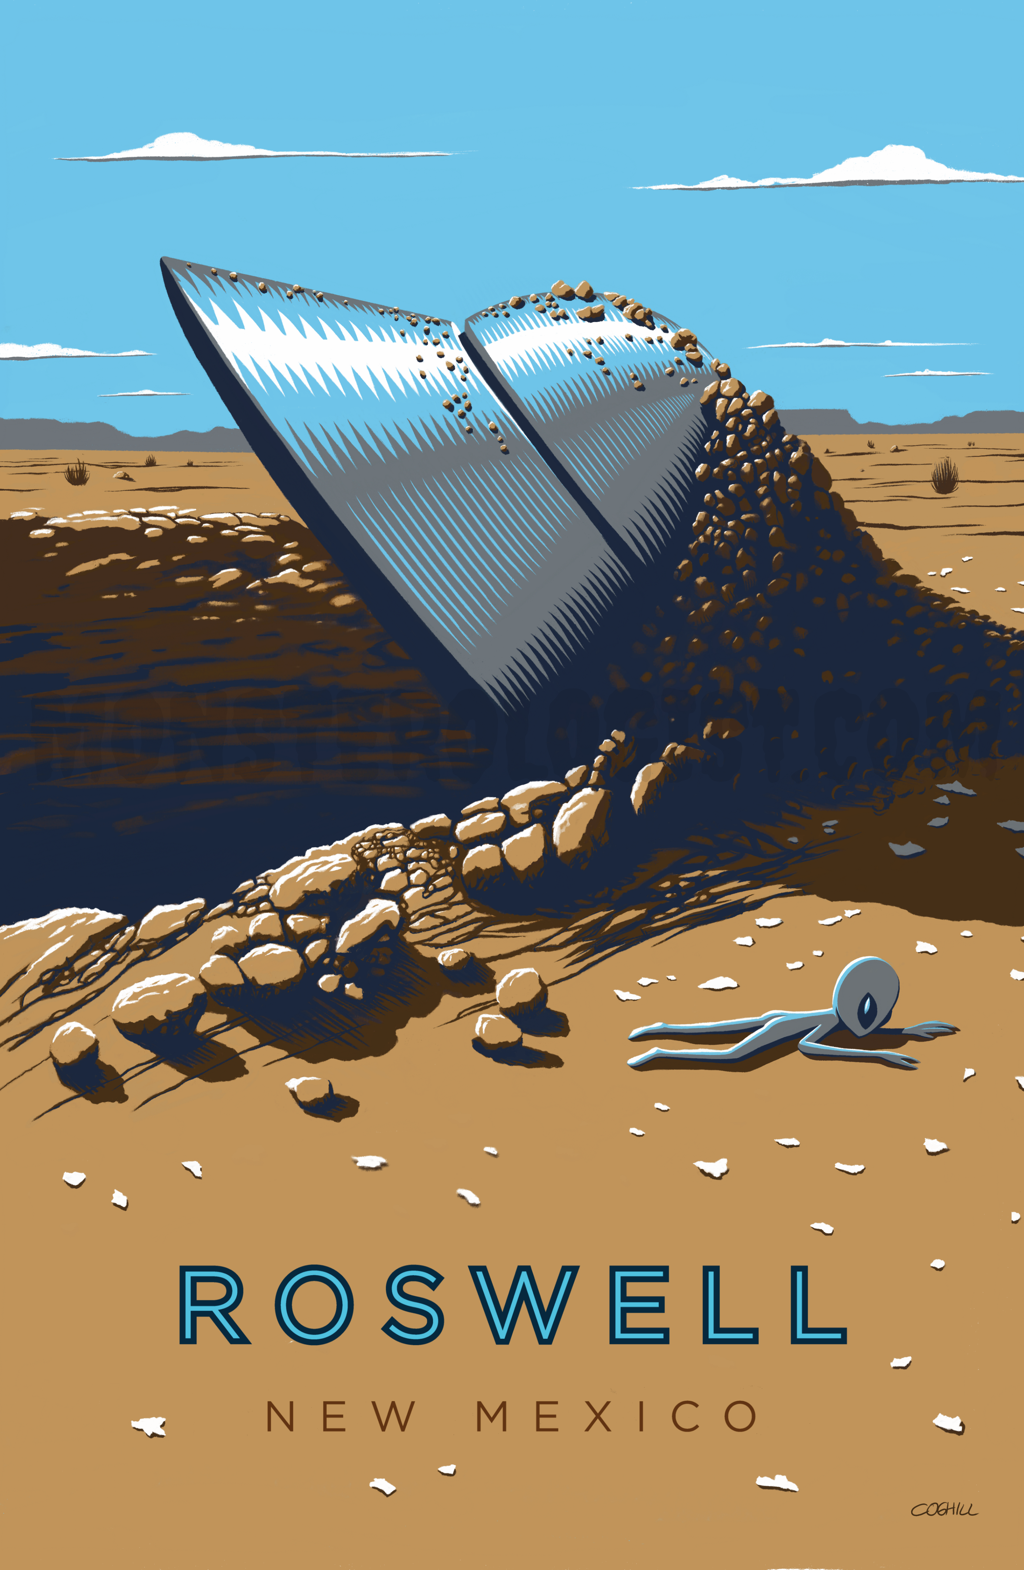 Roswell, New Mexico UFO crash travel poster 11x17